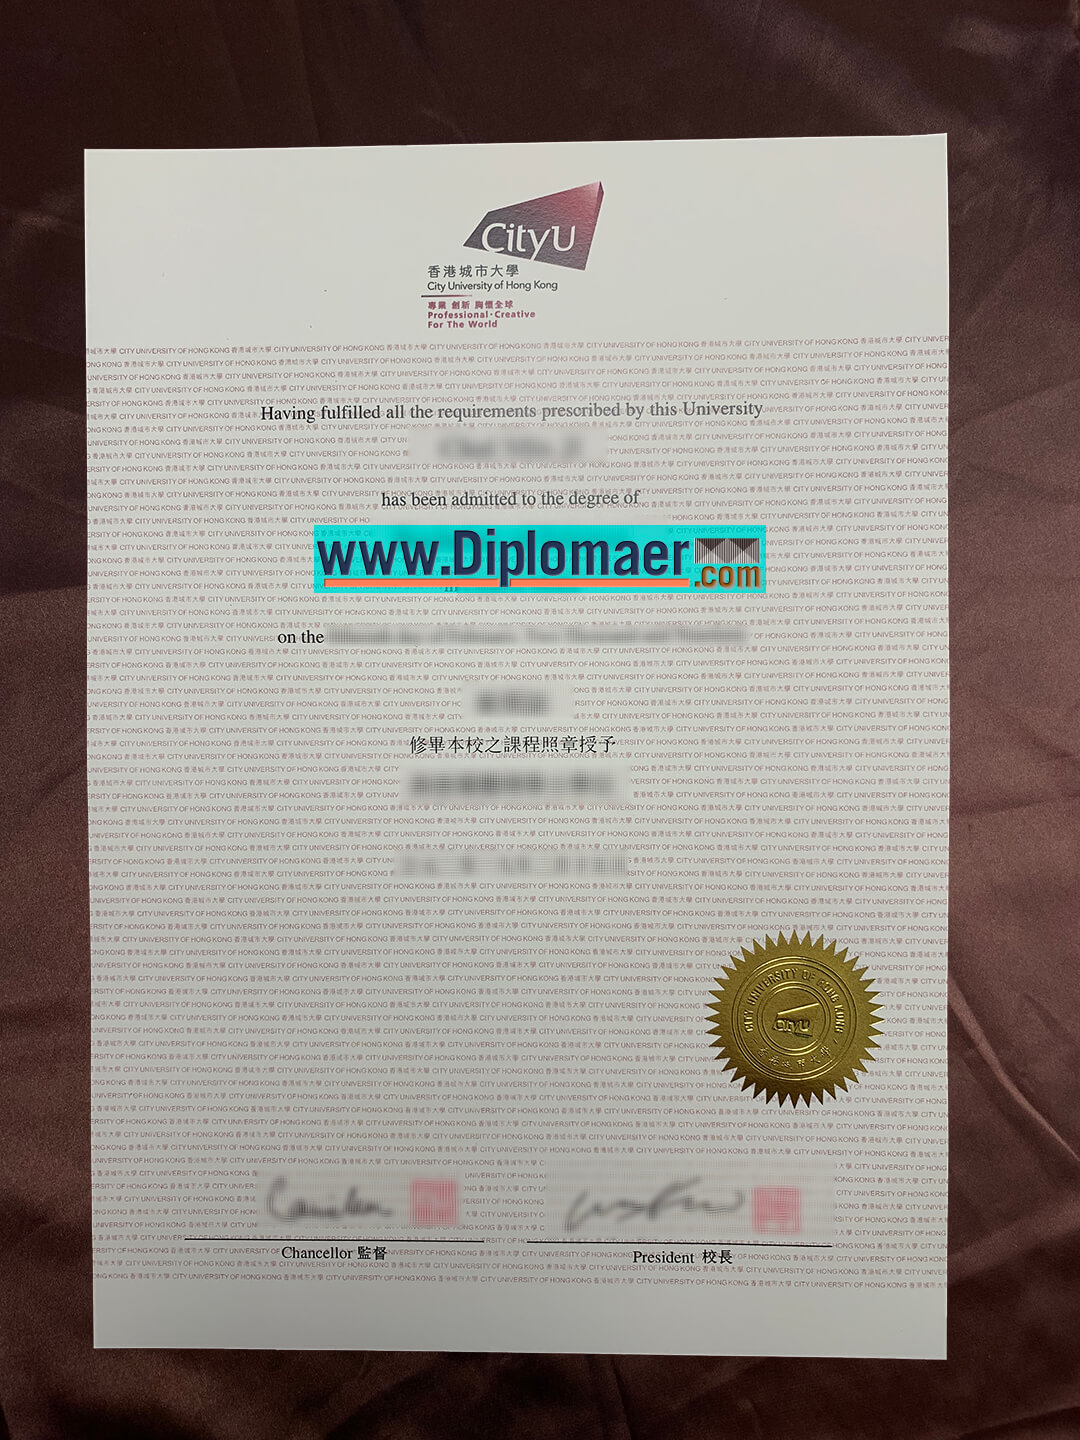 City University of Hong Kong Fake diploma - What are the benefits of buying a City University of Hong Kong fake diploma?